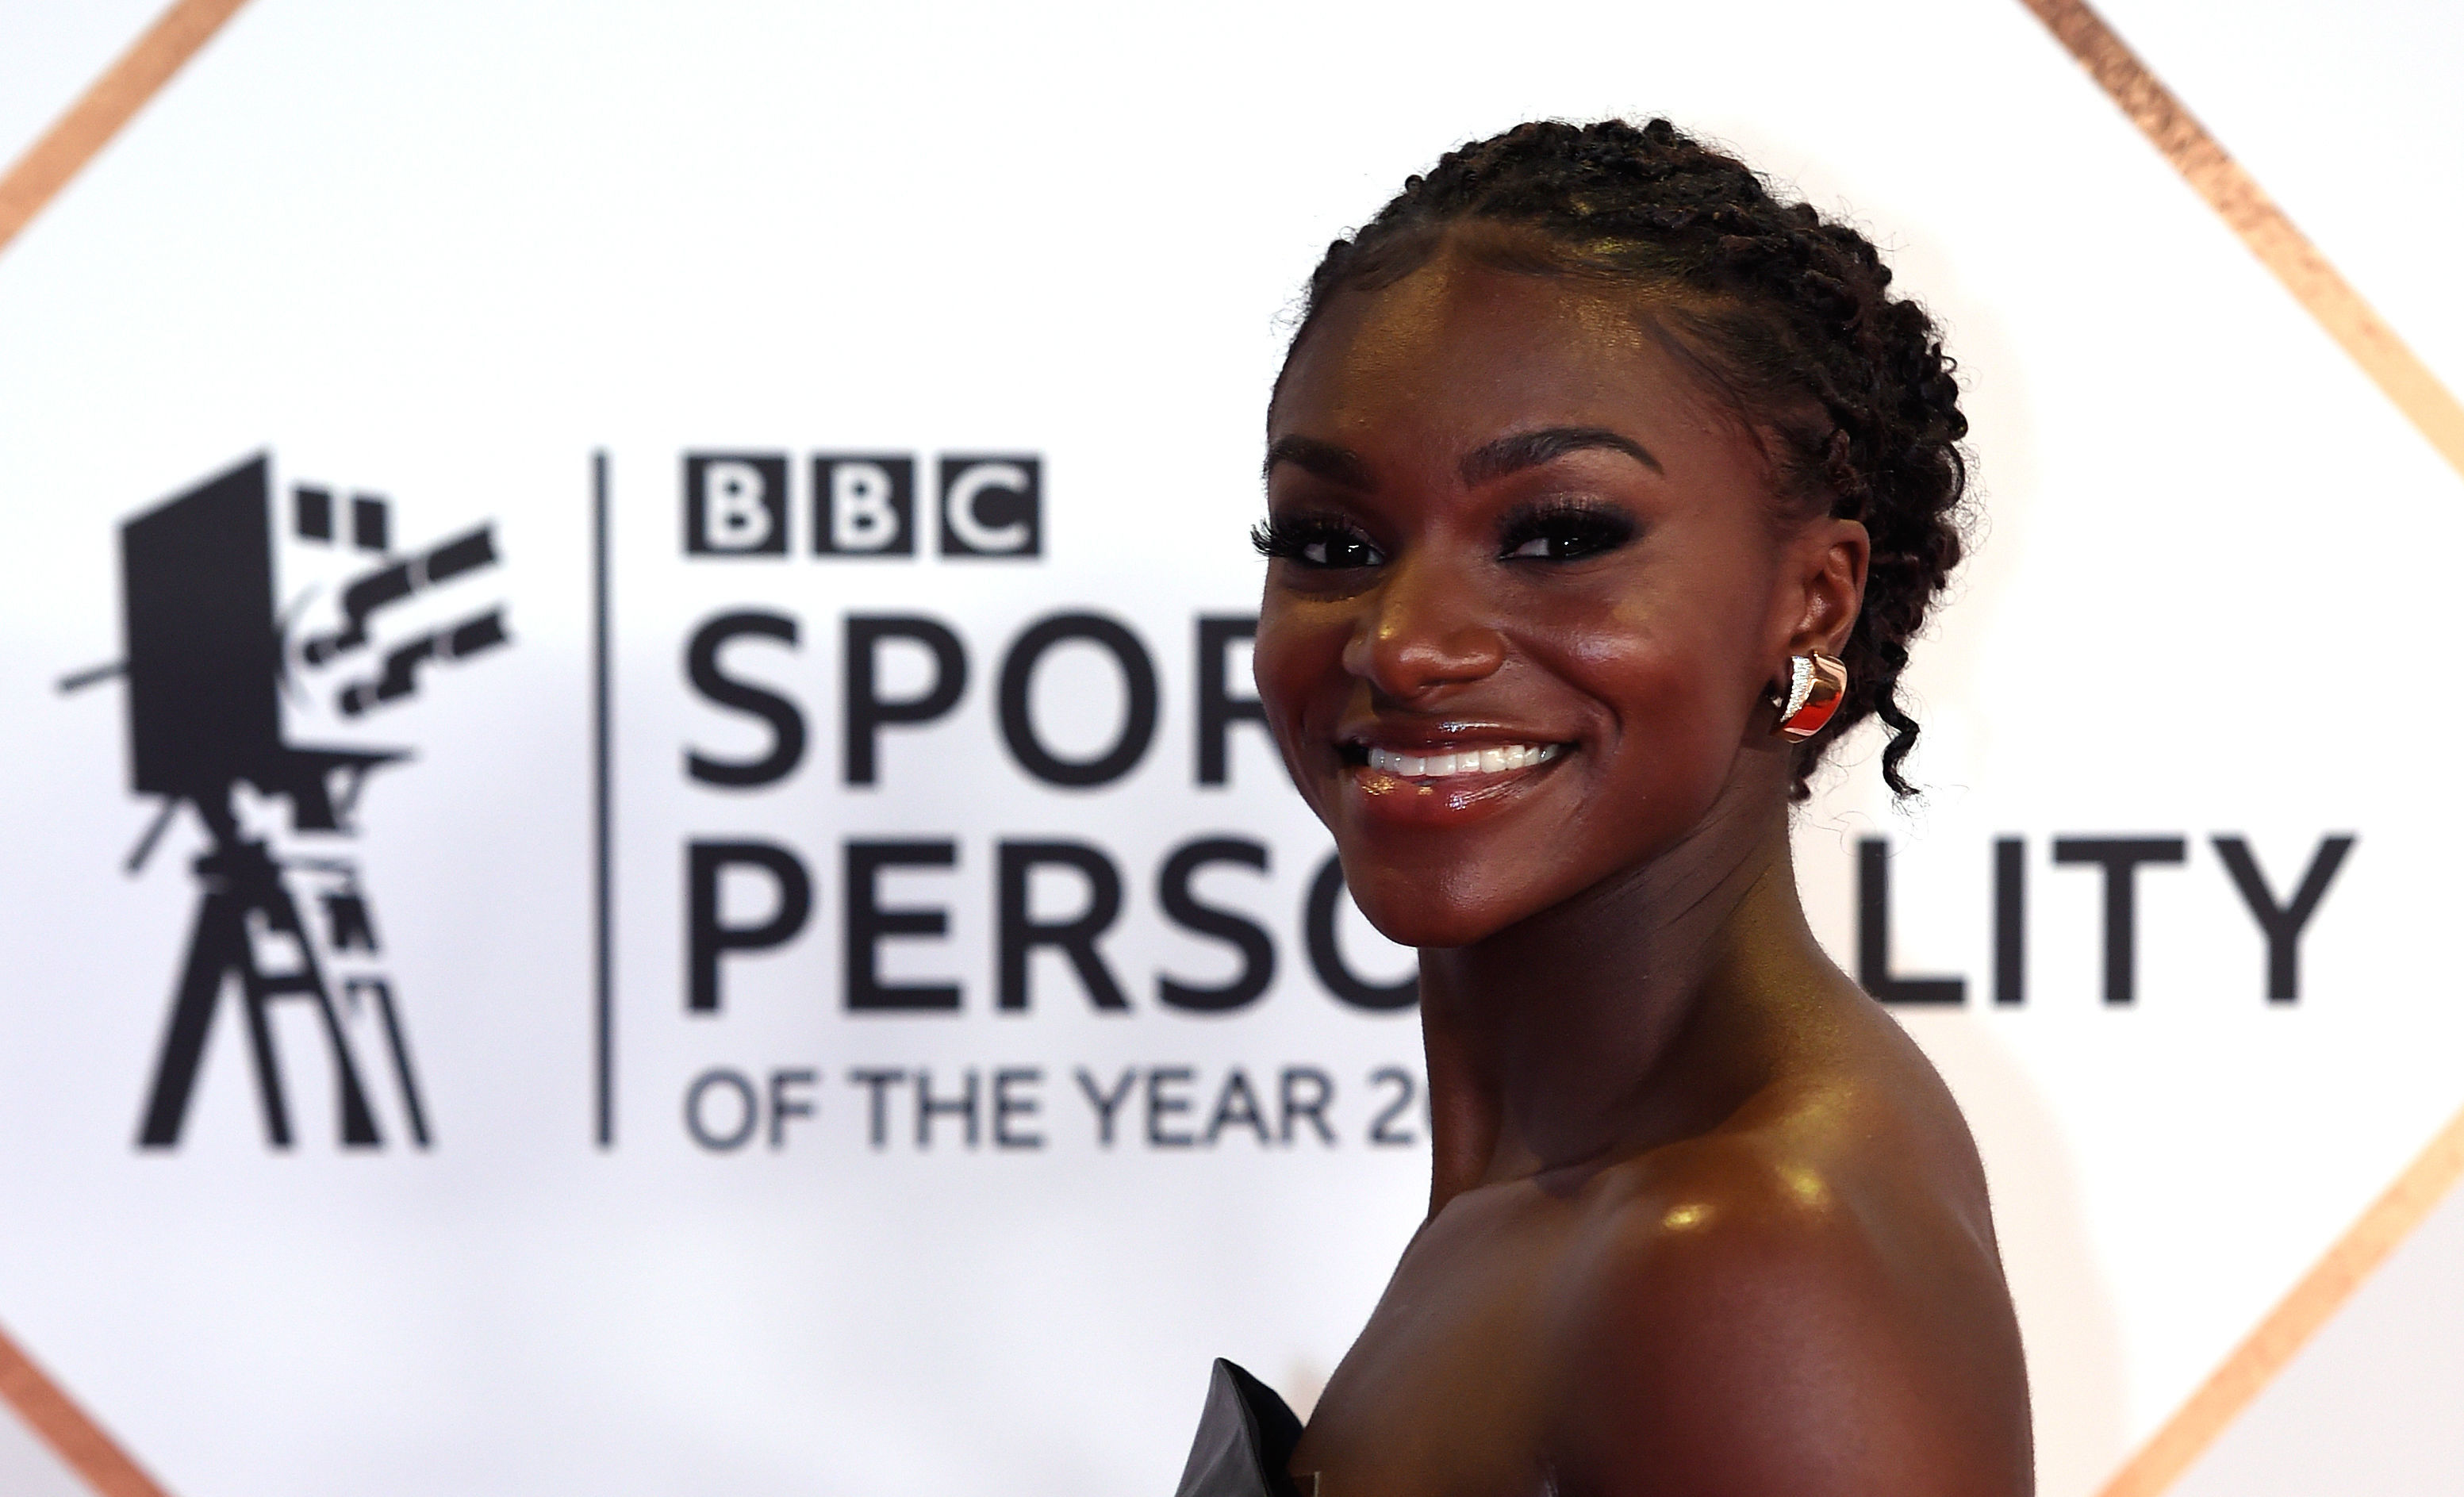 Dina Asher-Smith arriving for the BBC Sports Personality of the year 2019 at The P&J Live, Aberdeen.